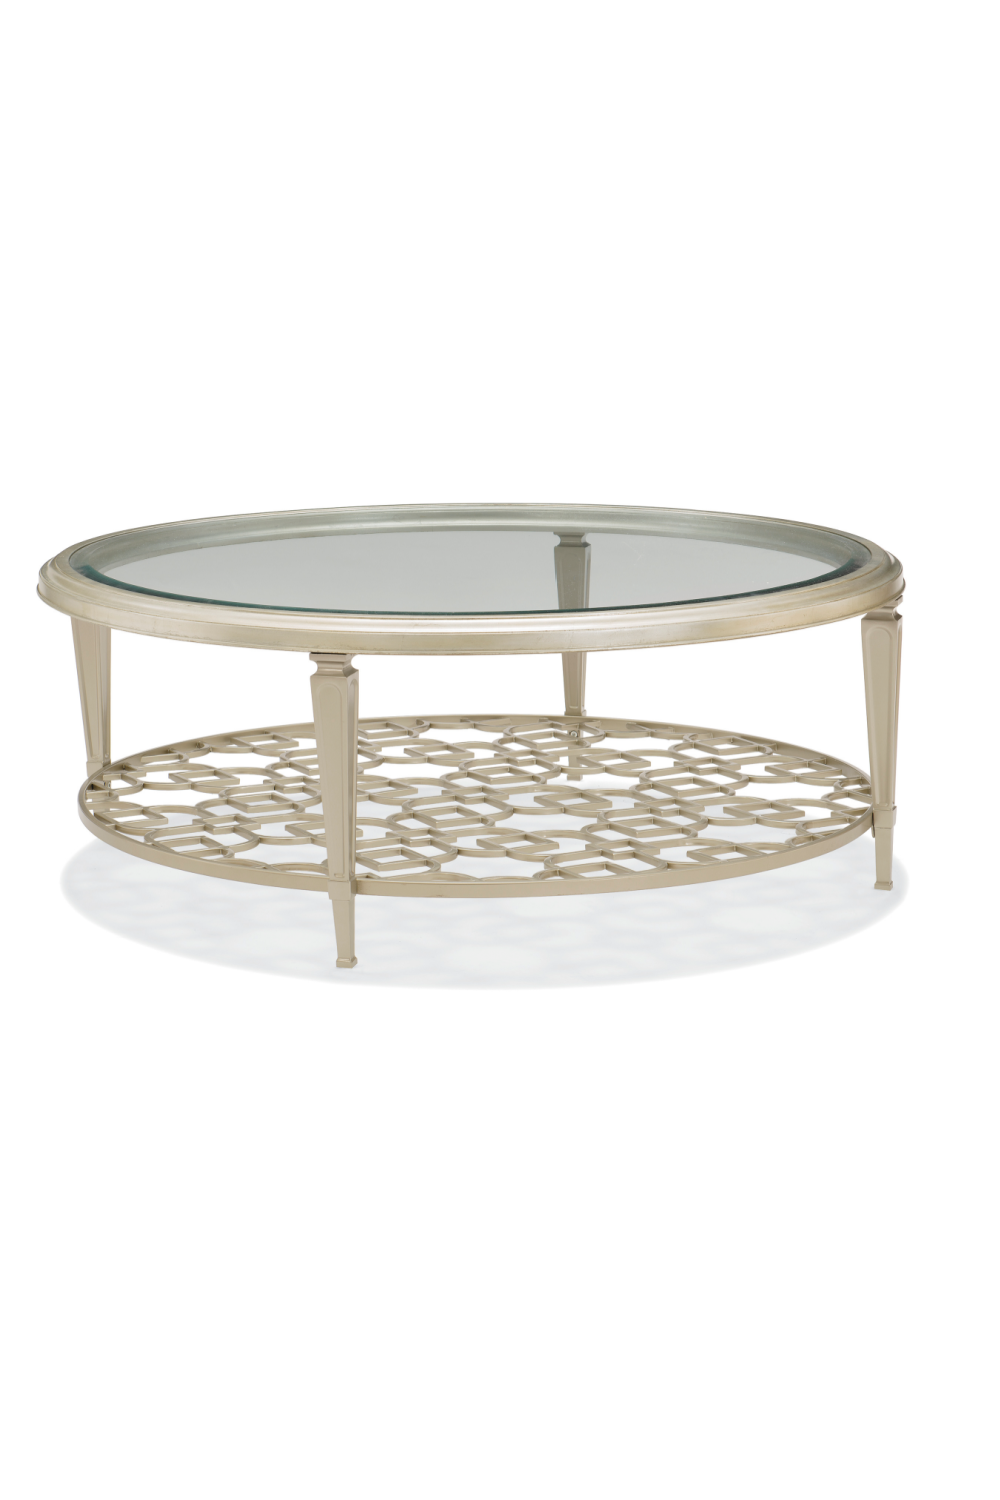 Bevelled Glass Coffee Table | Caracole Social Gathering | Oroa.com